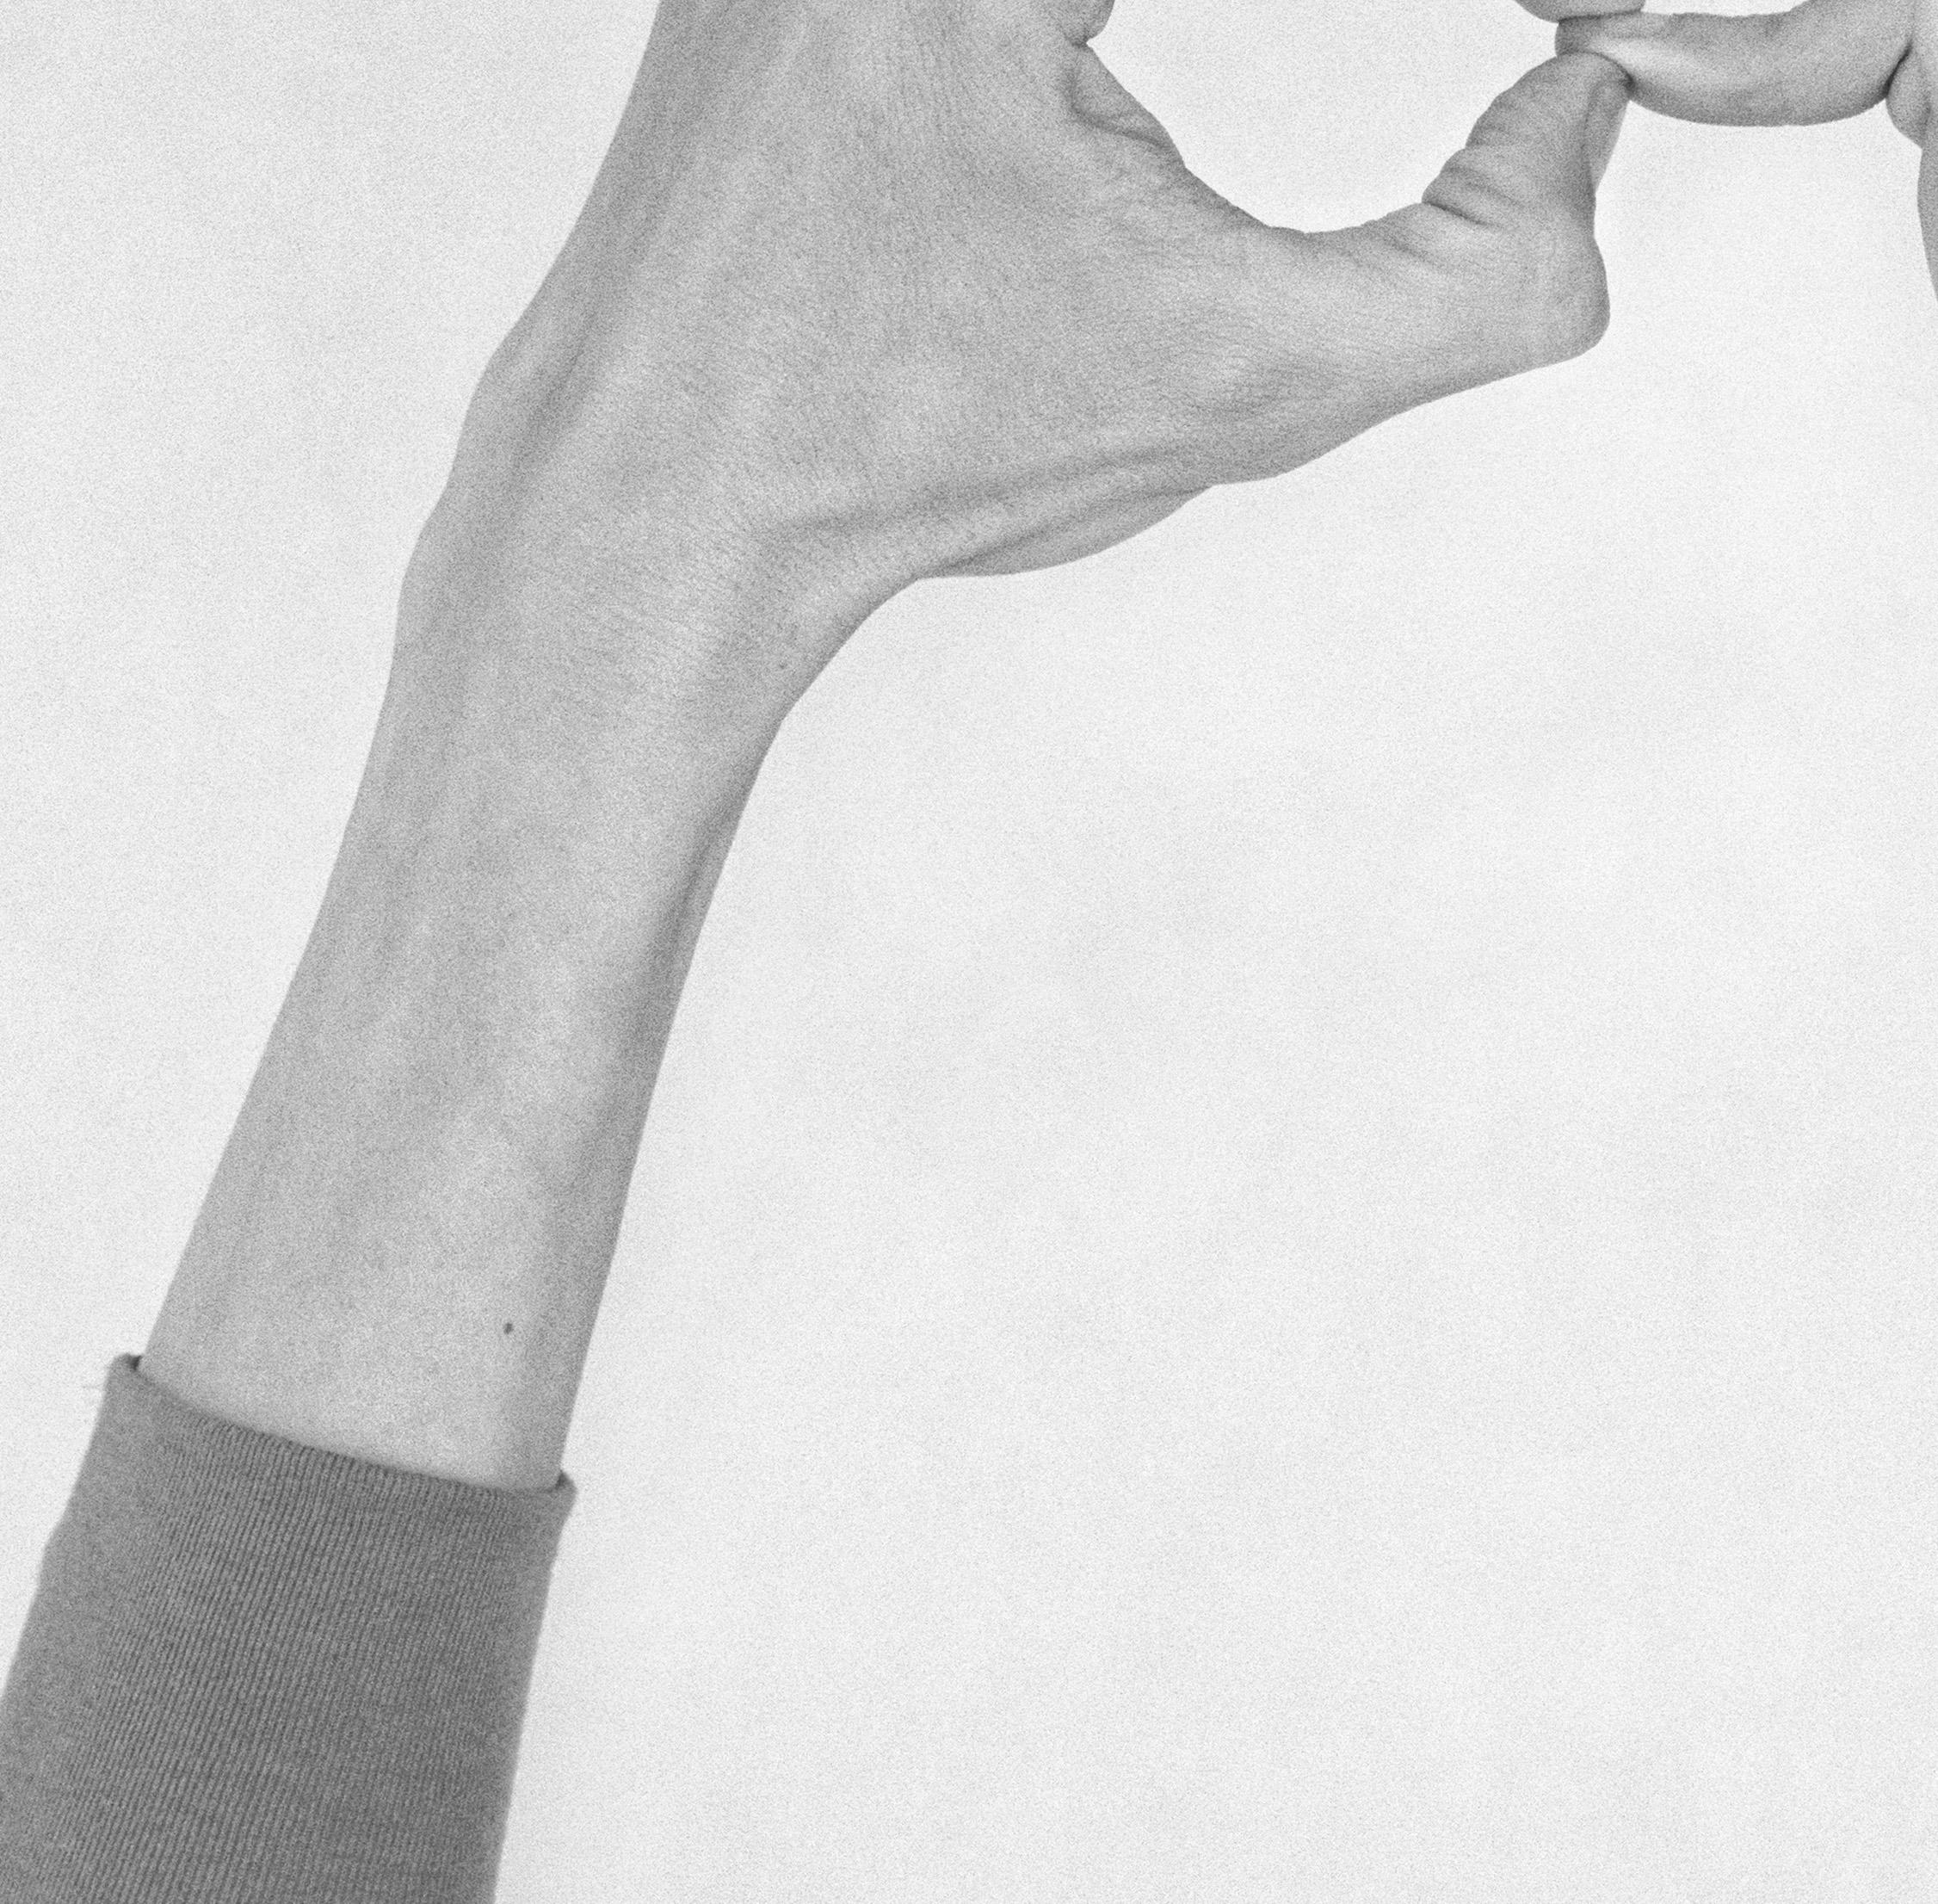 Untitled XXI. From the Series Chiromorphose. Hands. Black & White Photography For Sale 2